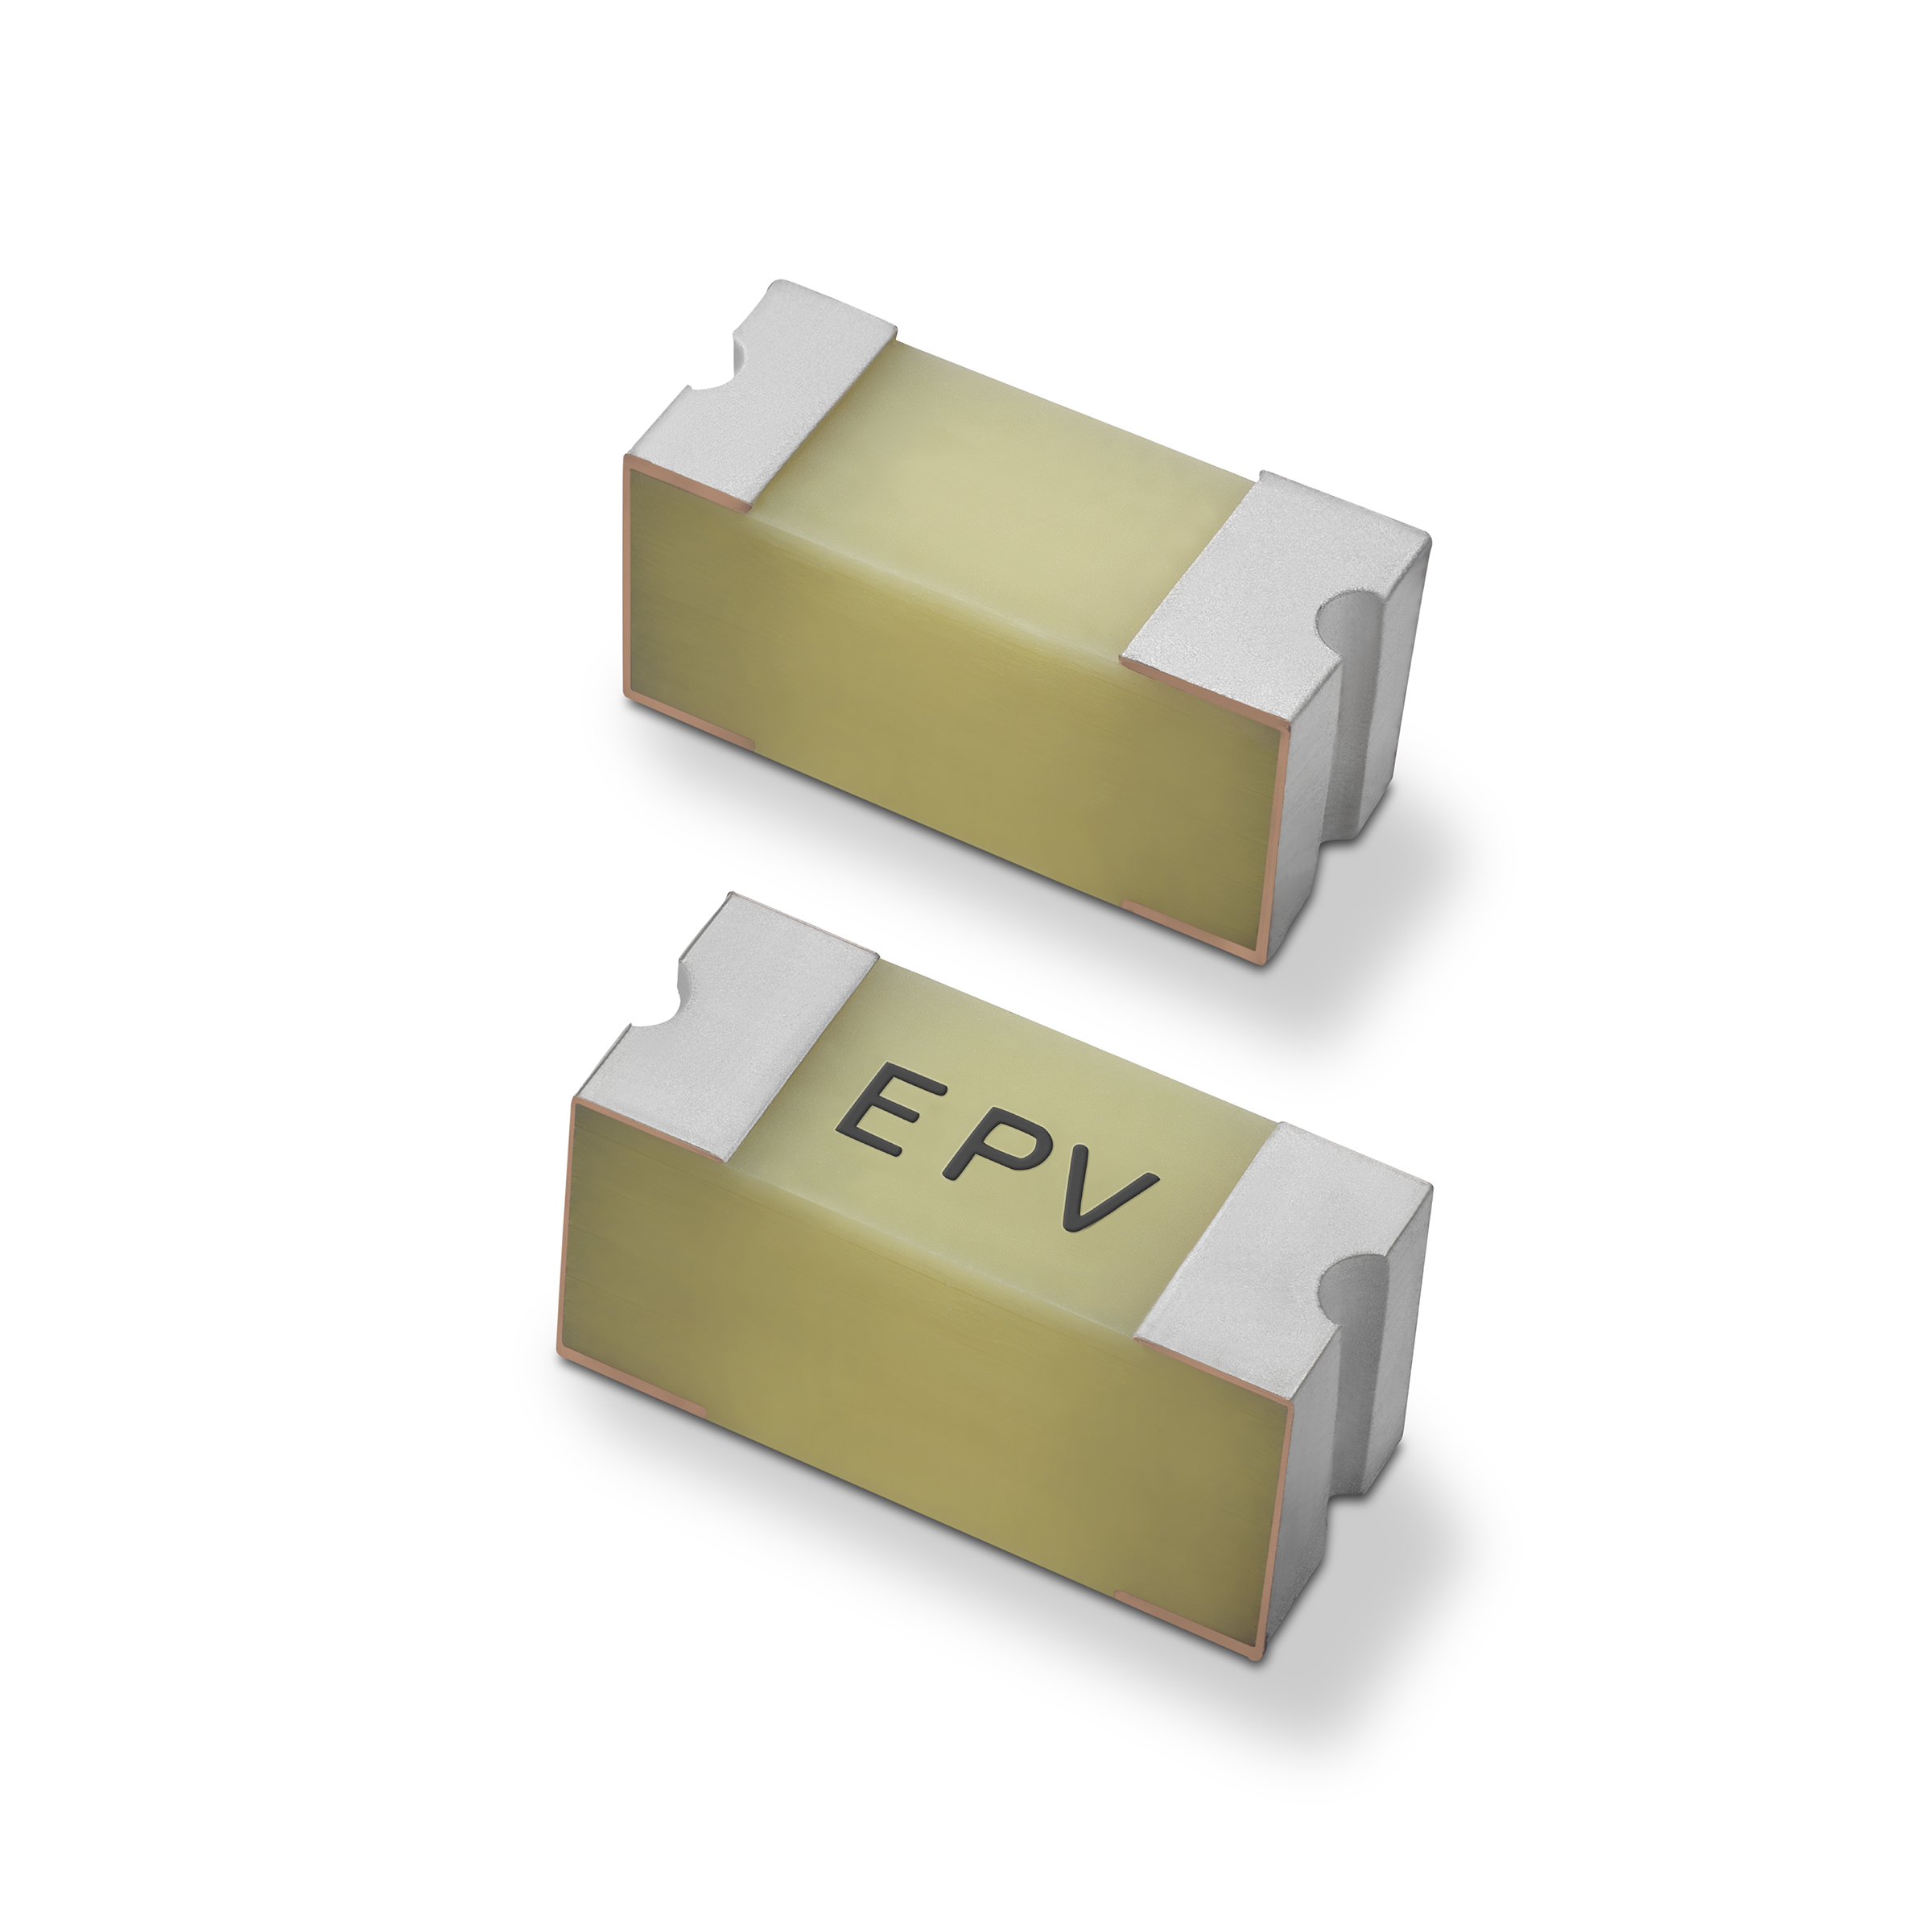 400PV Photovoltaic Fuses Provide Rugged Circuit Protection